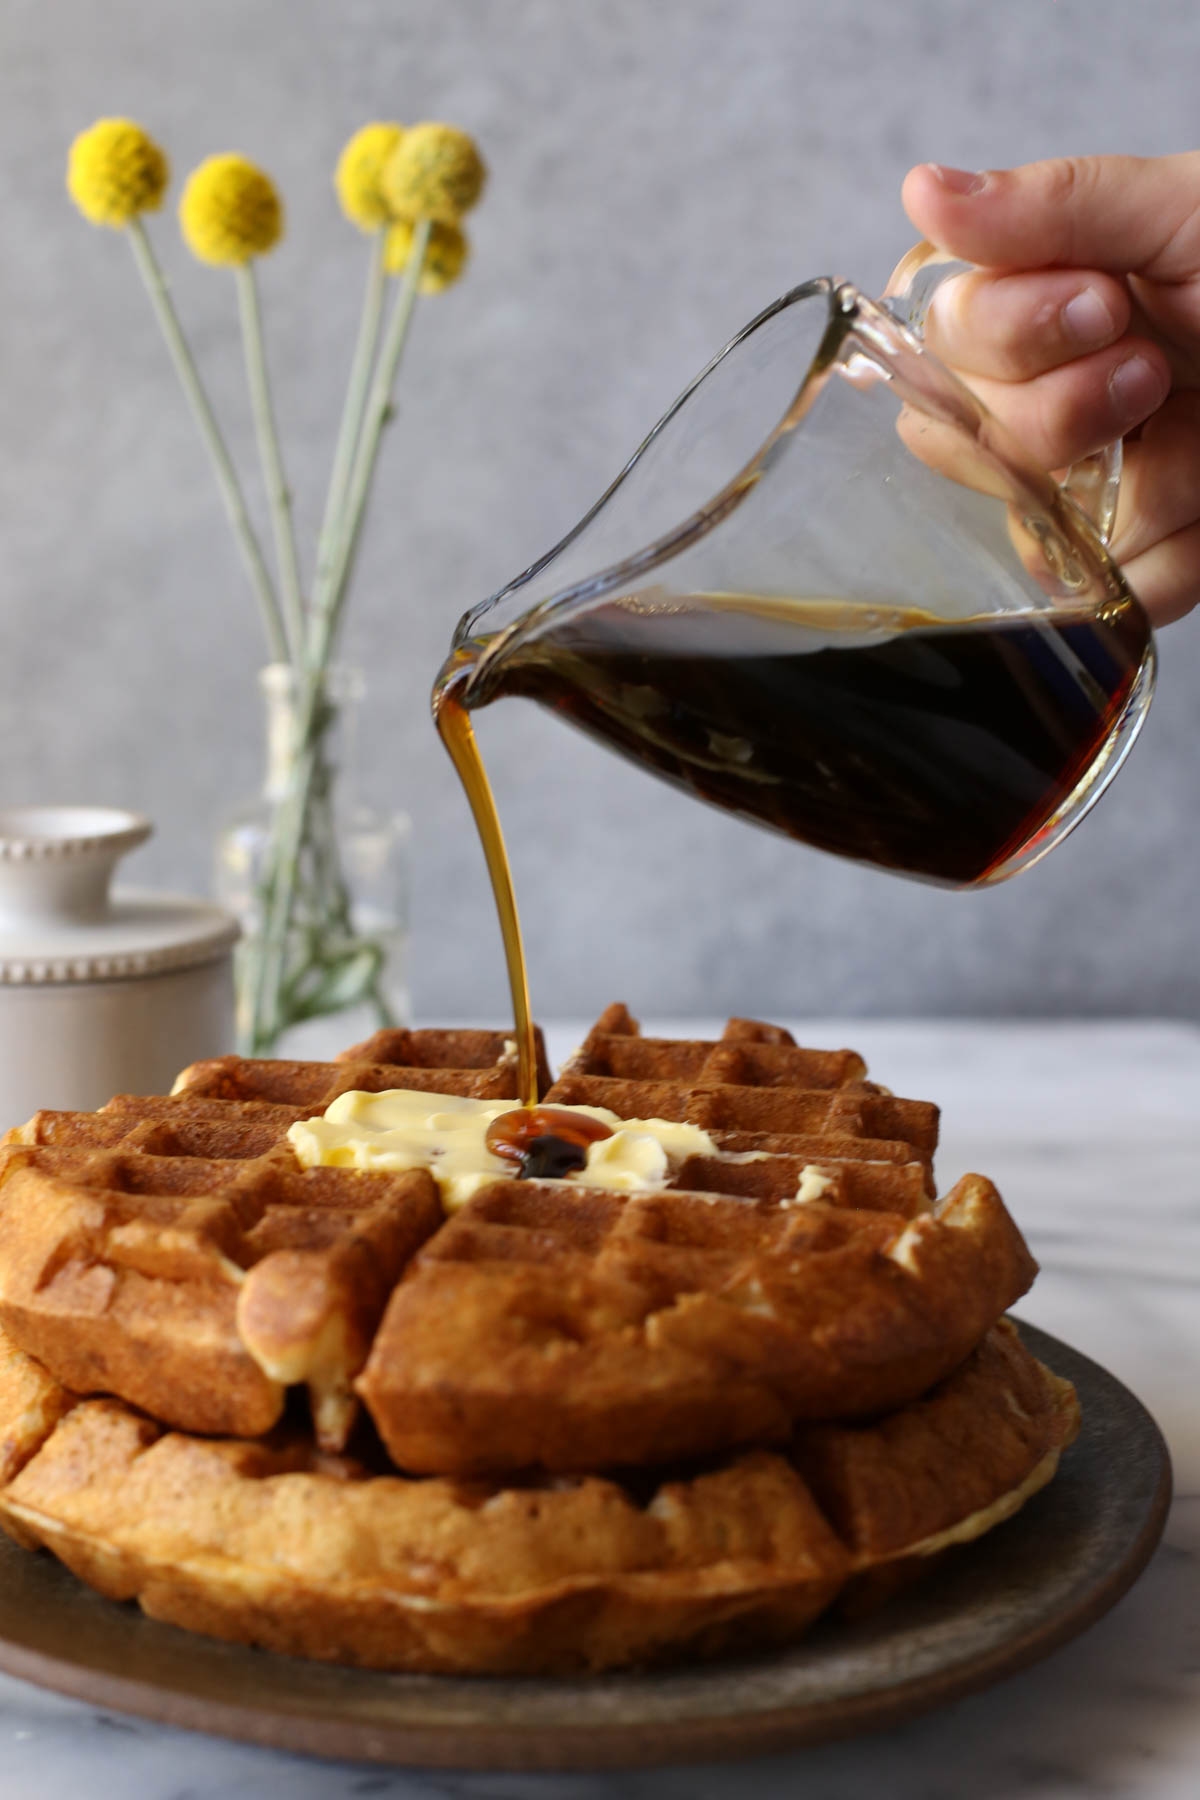 Two Overnight Sourdough Waffles stacked on a plate, with a hand pouring syrup over the waffles from a mini glass pitcher, with a butter dish and flowers in a vase in the background. 